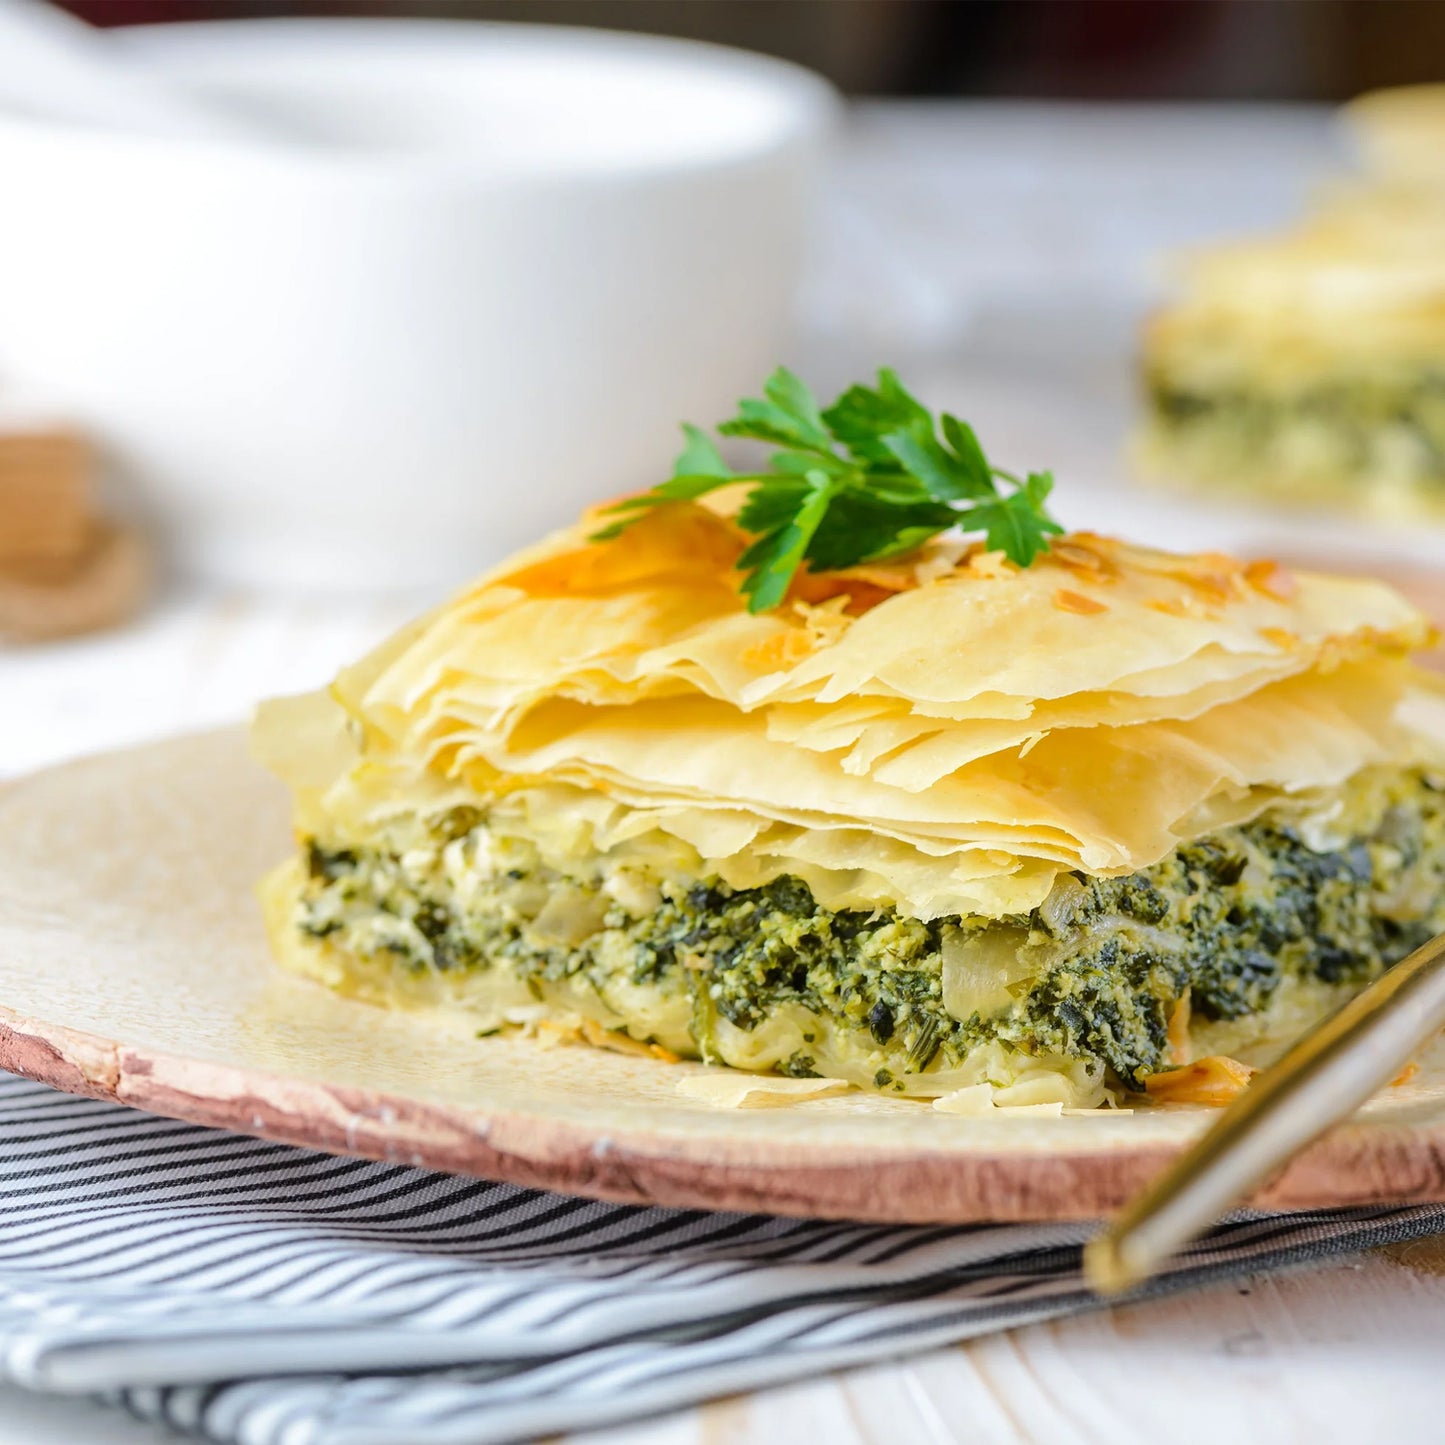 Alaz Goulash (Filo Pastry Spinach & Cheese) Serves 8 - Cooked